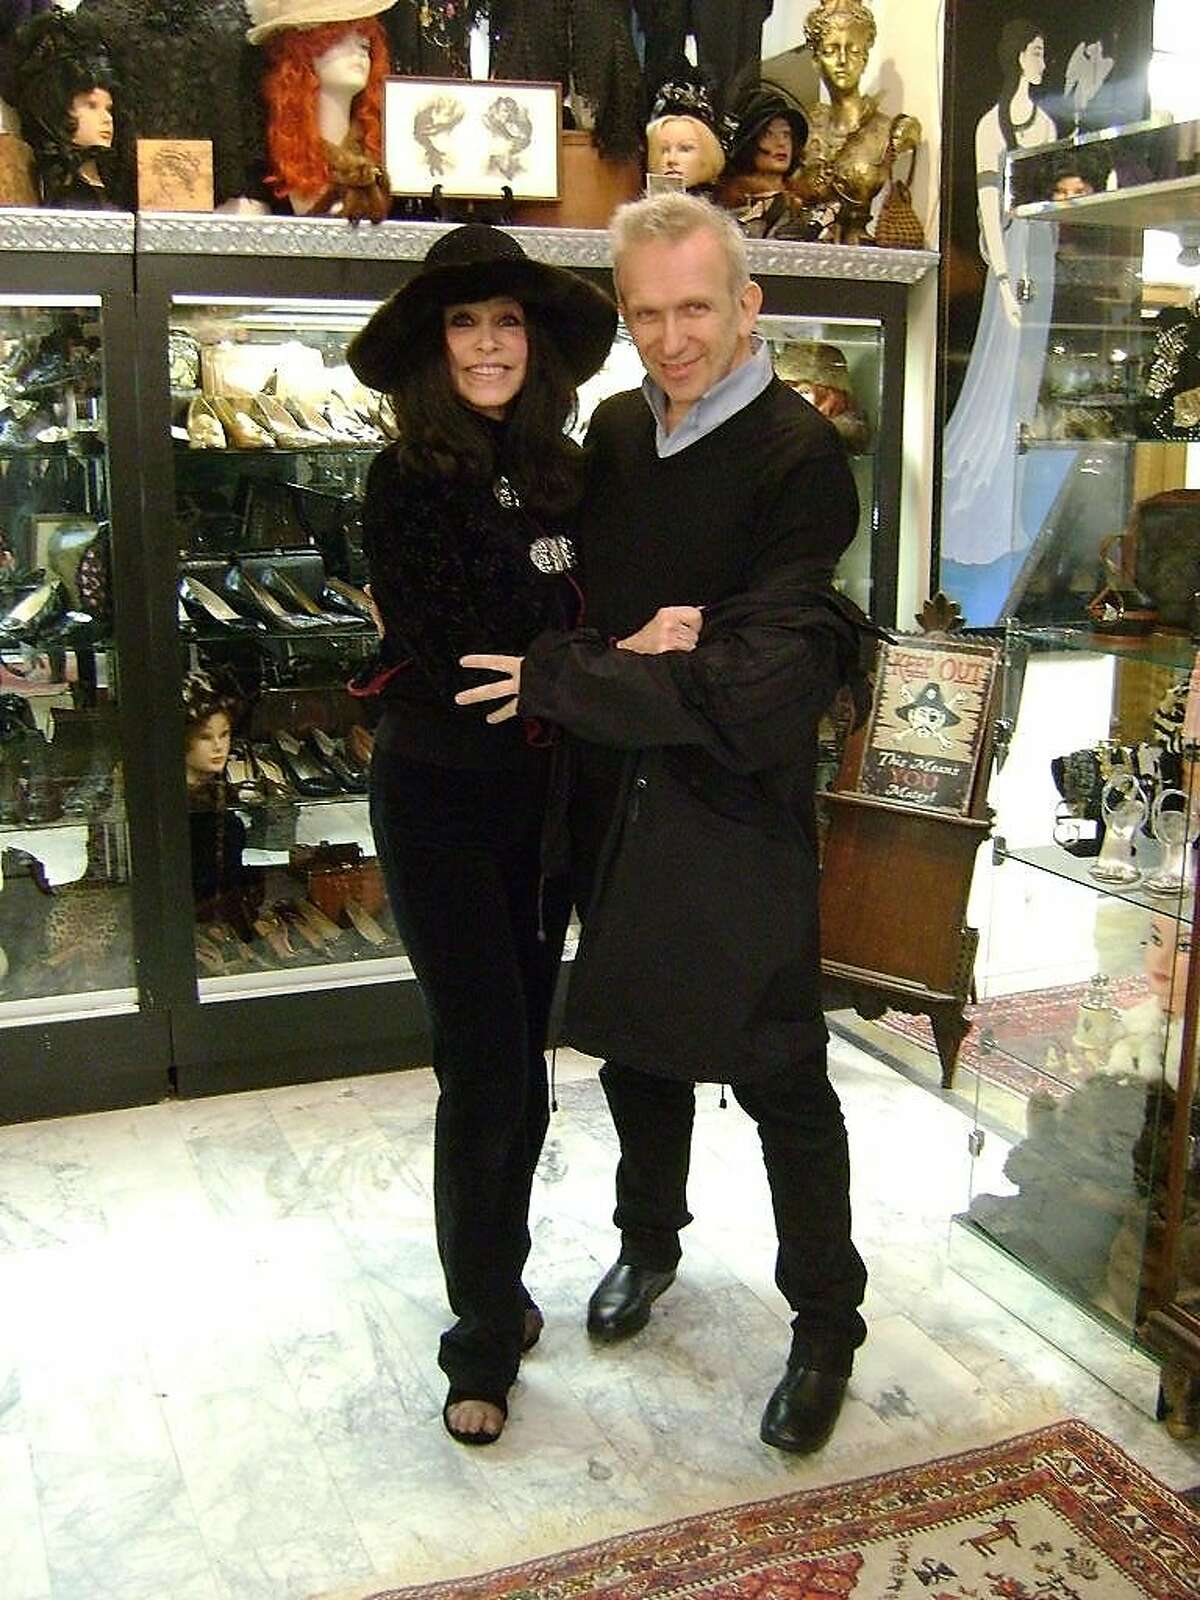 Decades of Fashion owner Cicely Hansen with fashion designer Jean Paul Gaultier at her store on Haight Street.